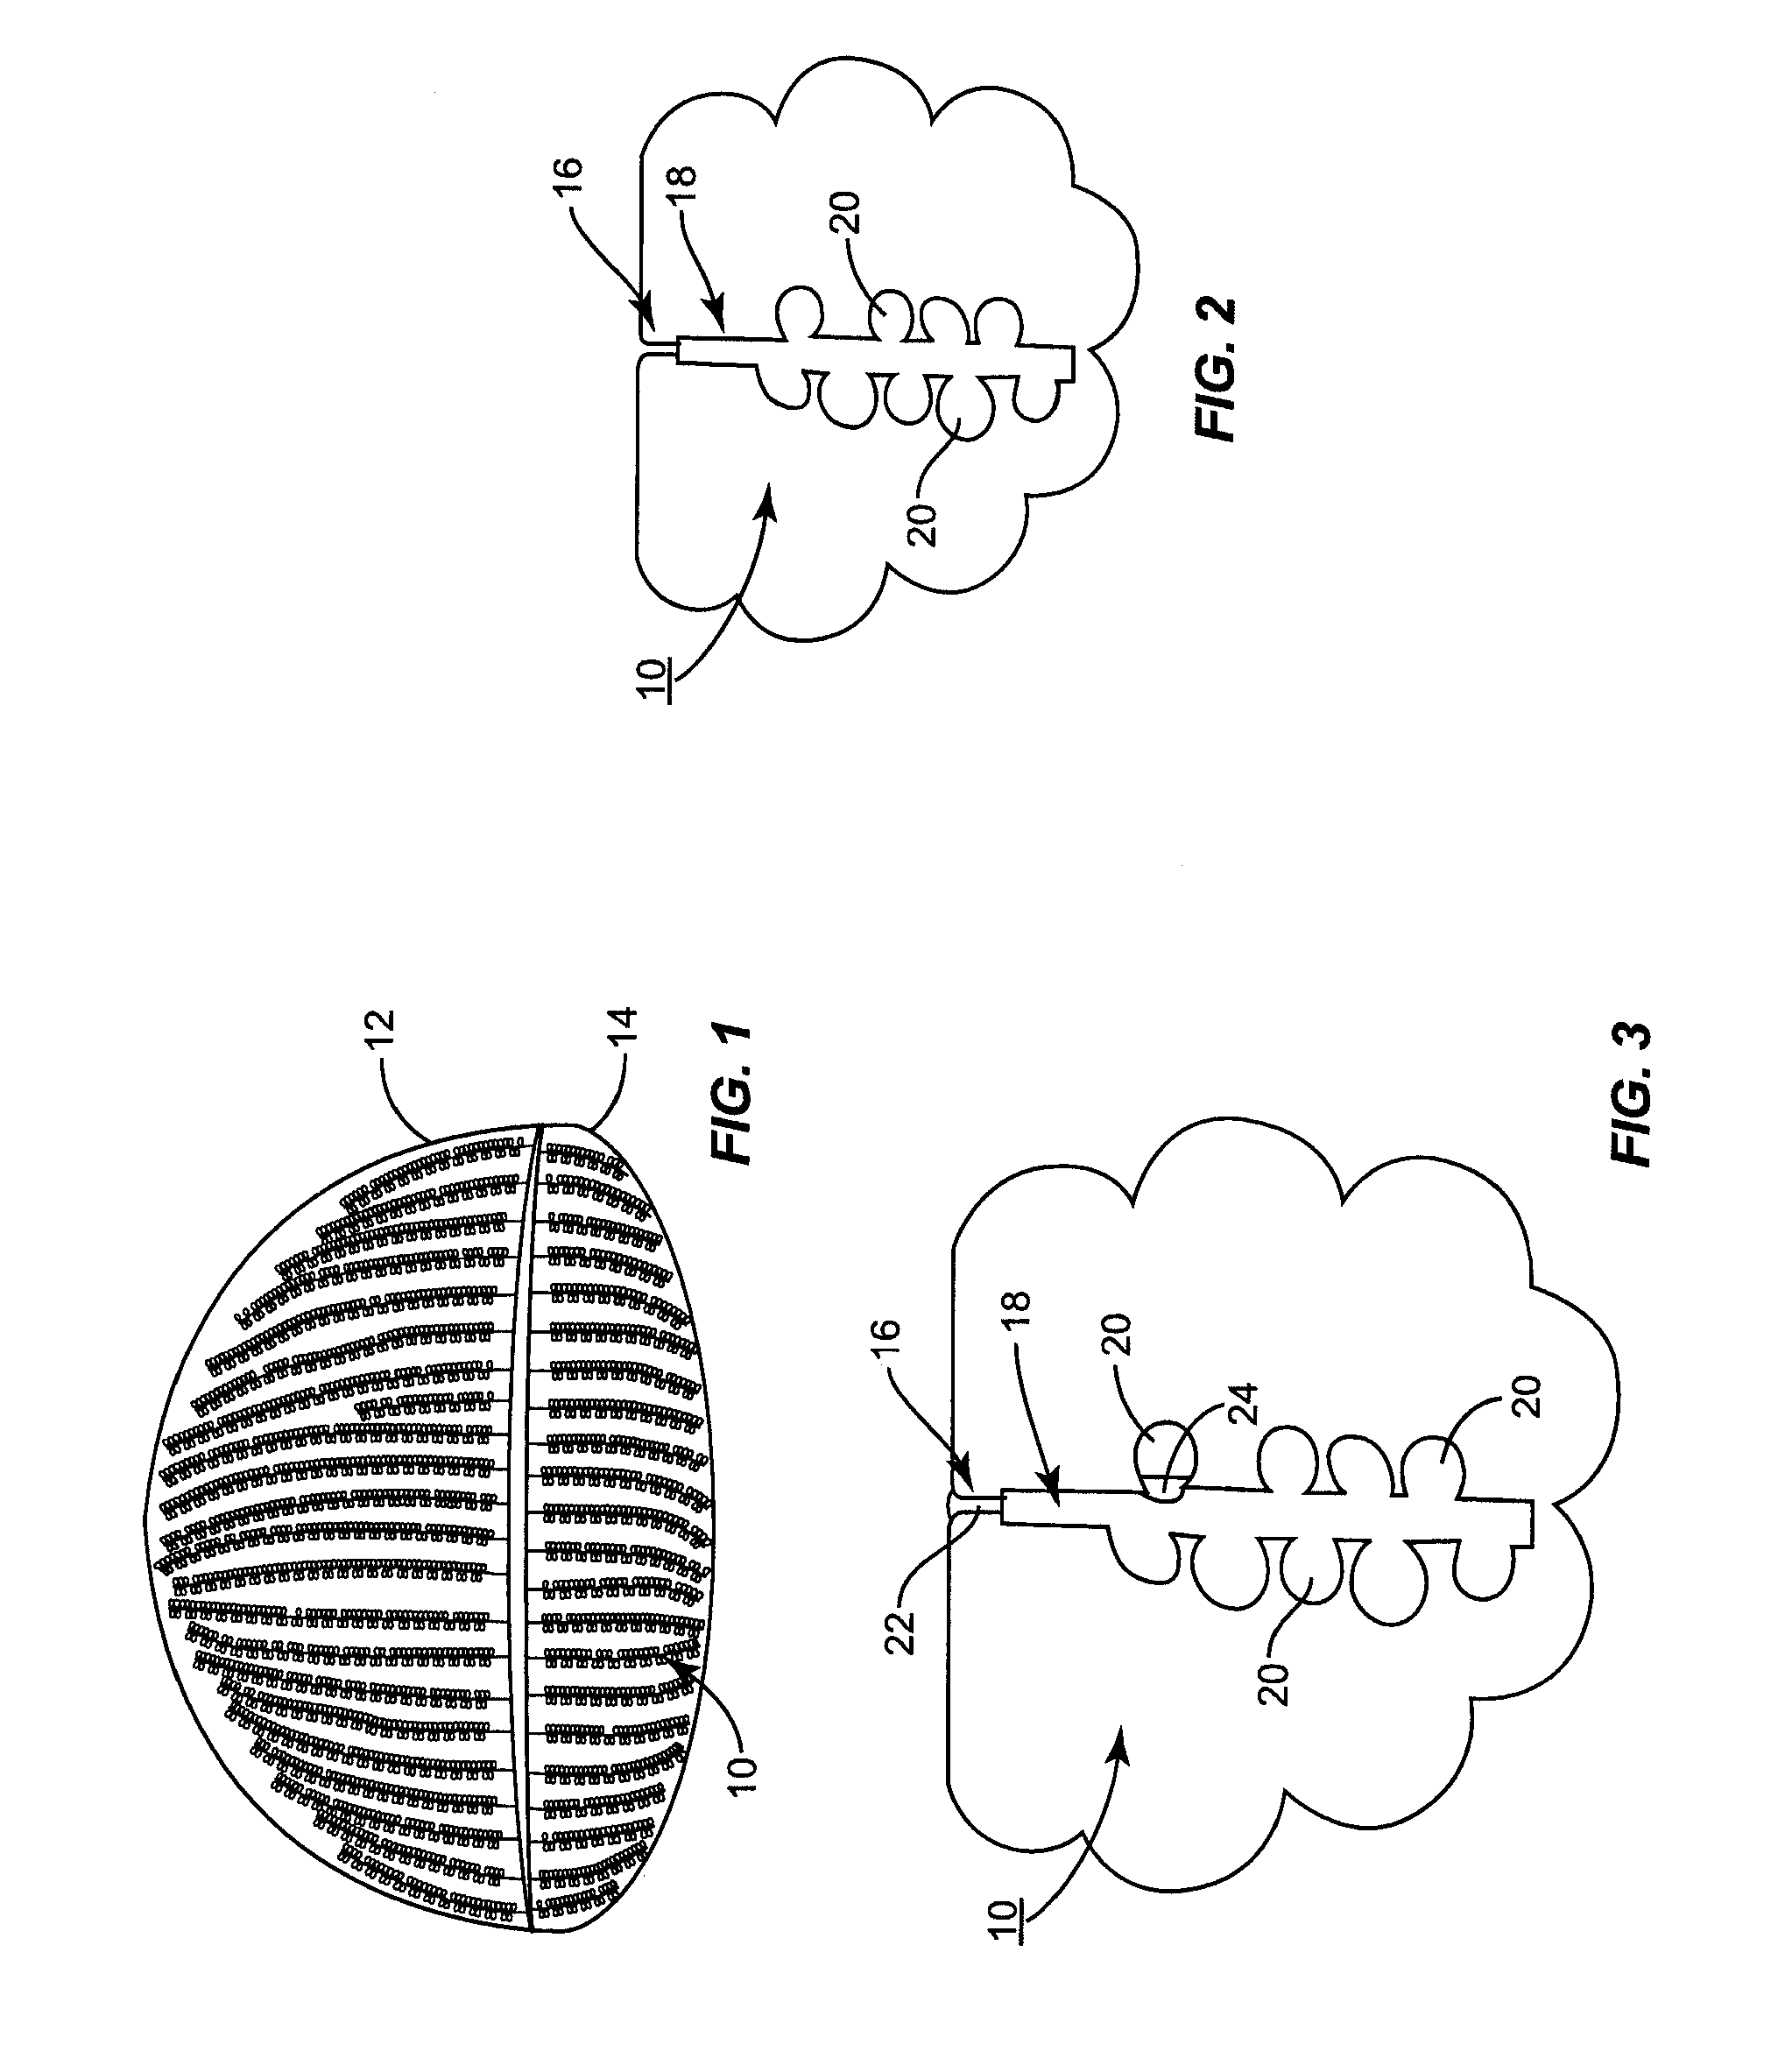 Apparatus for inner eyelid treatment of meibomian gland dysfunction